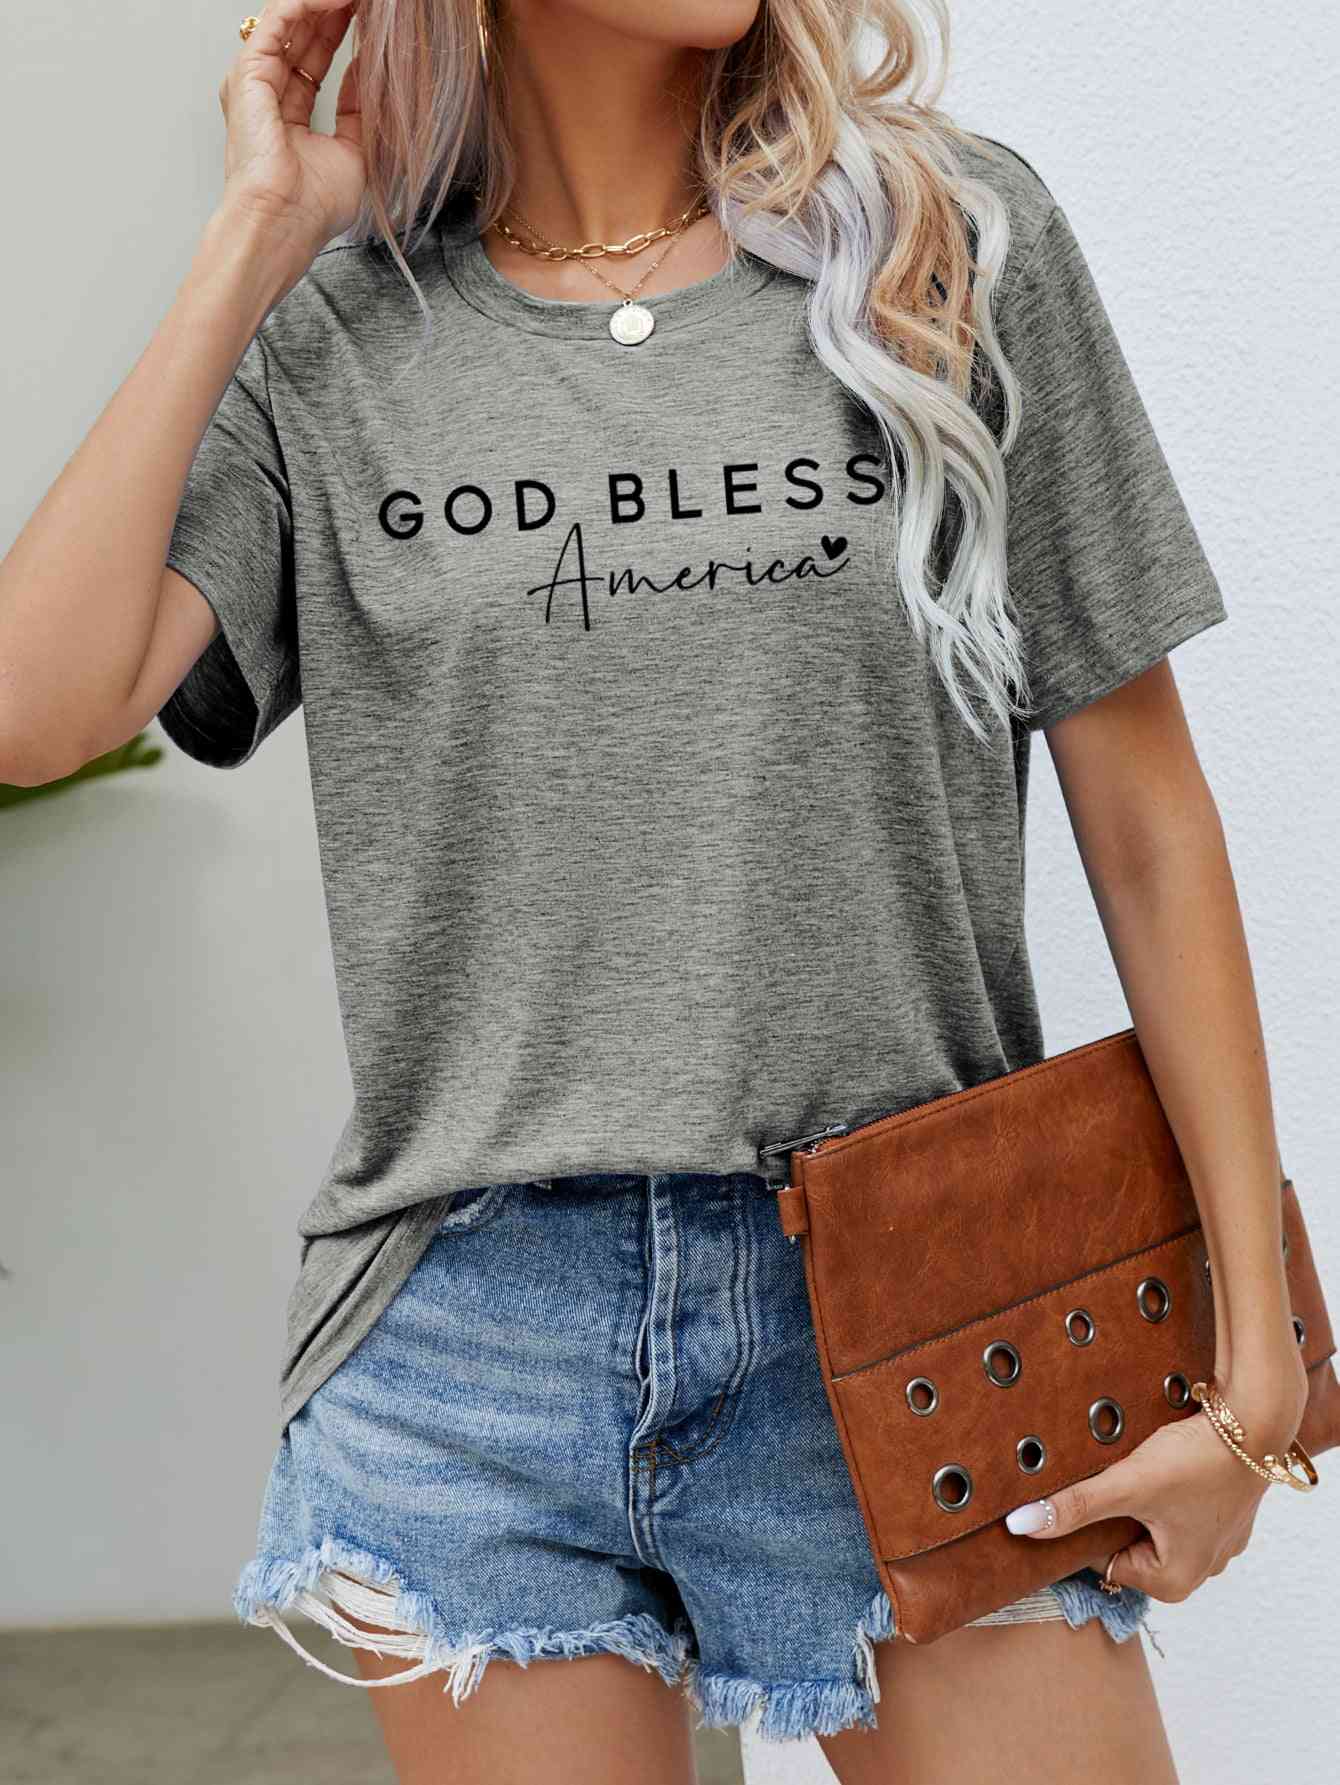 GOD BLESS AMERICA Graphic Short Sleeve Tee Mid Gray S 